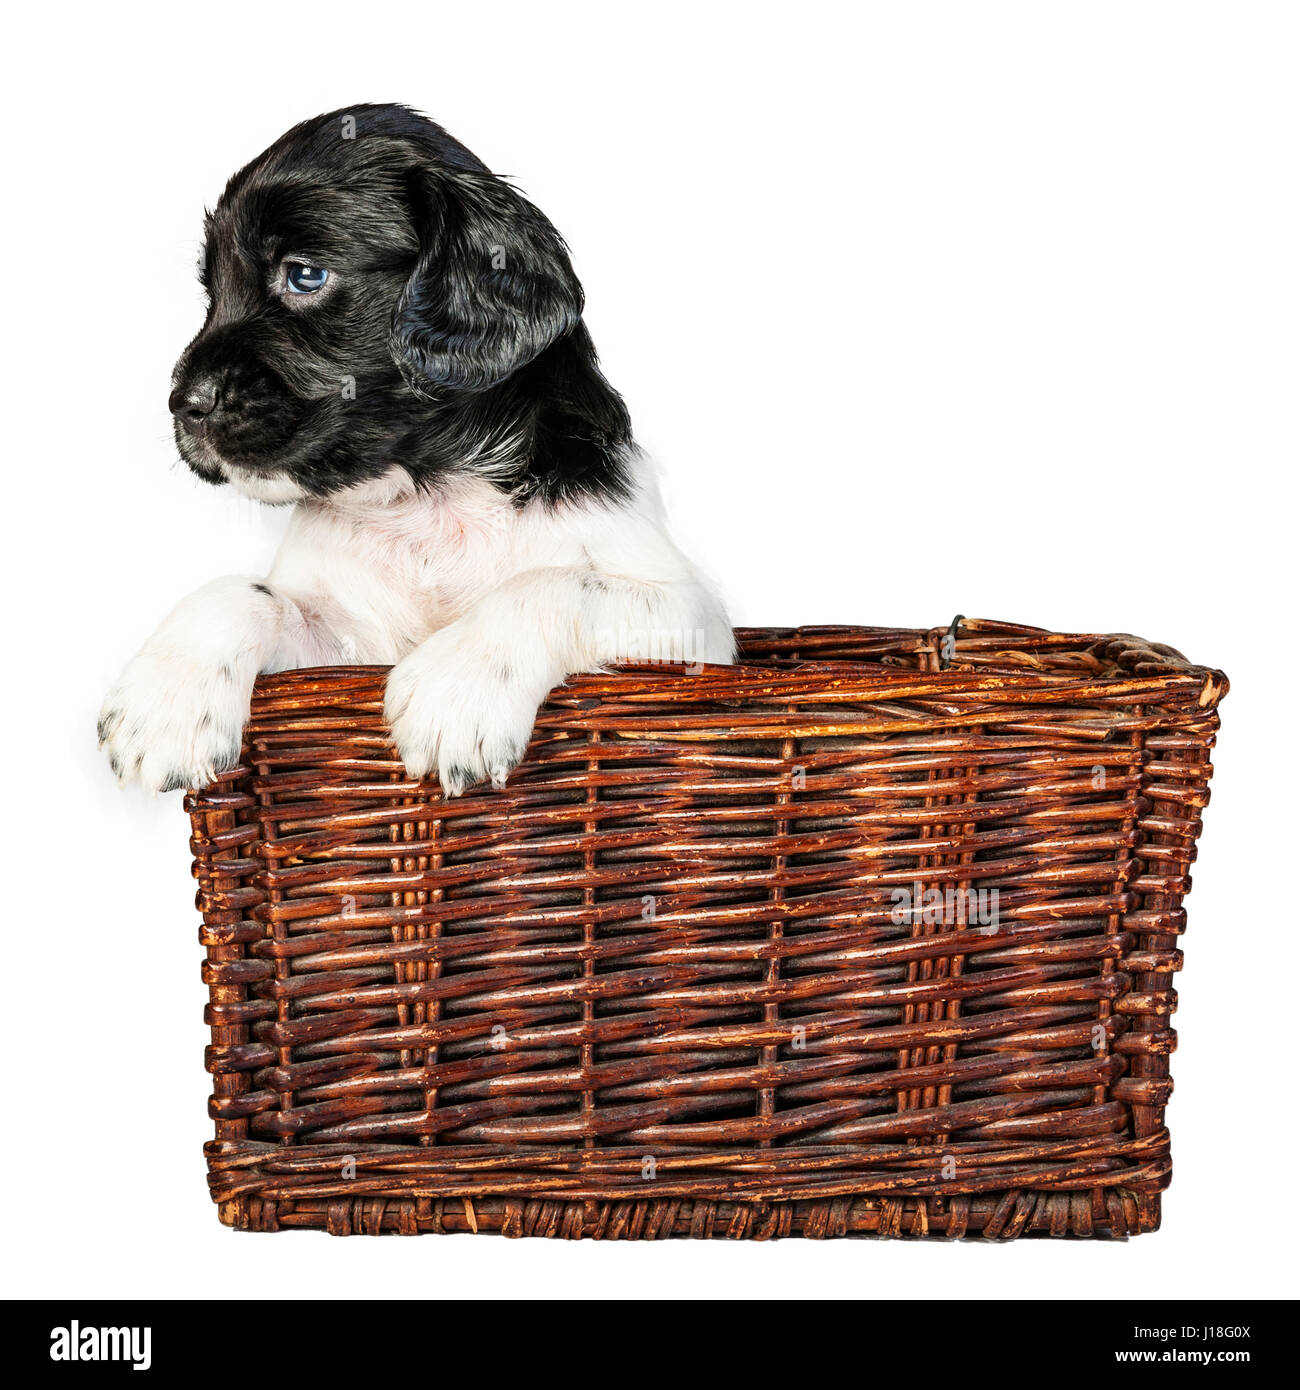 A 4 week old black and white English Springer Spaniel puppy in a wicker basket Stock Photo